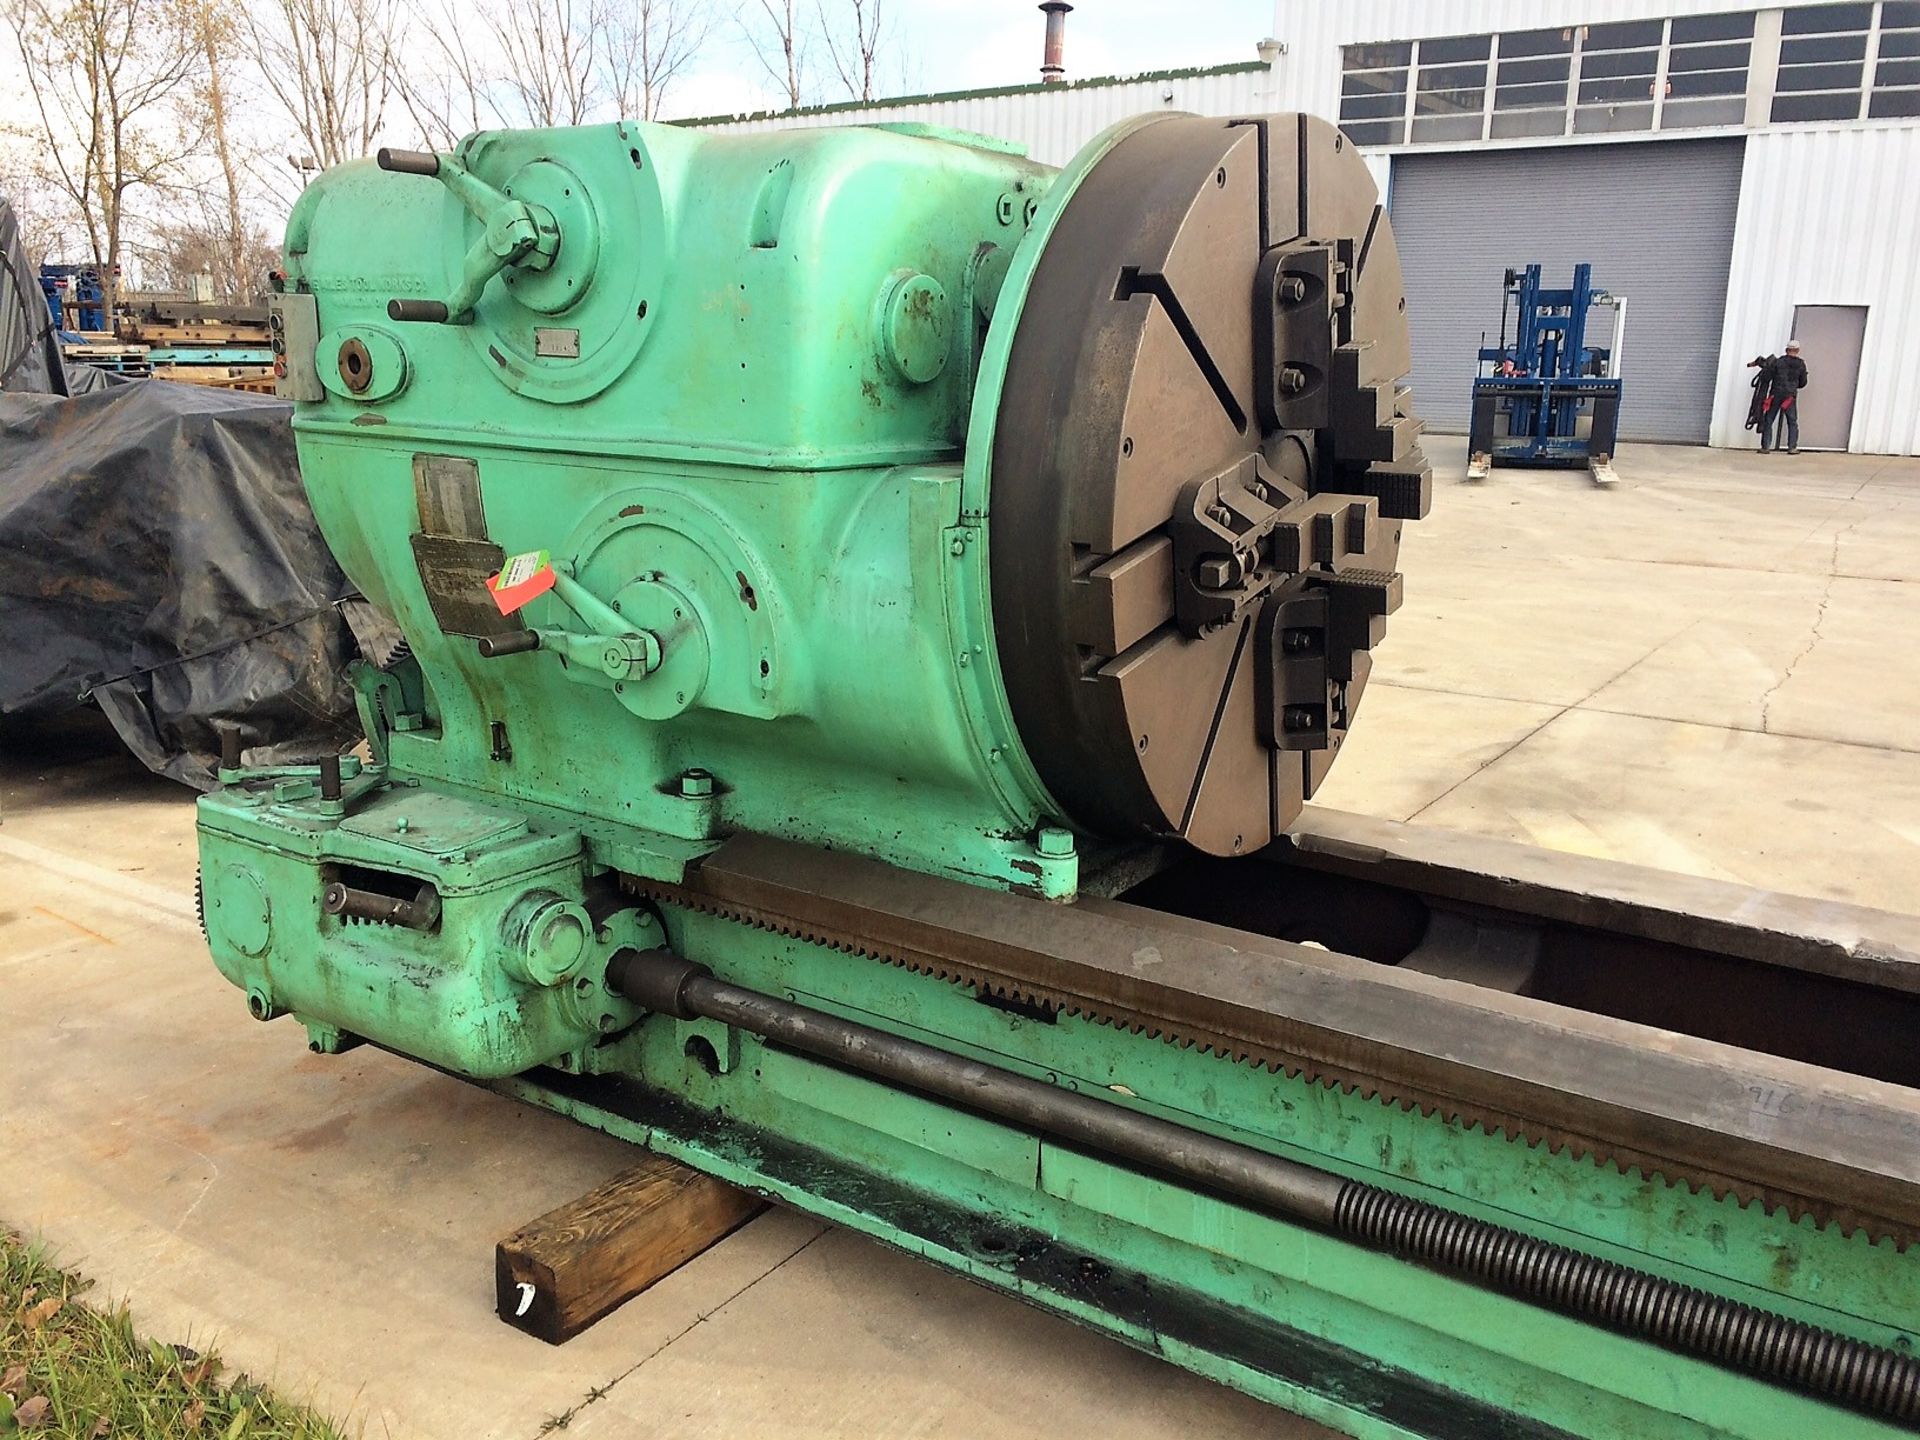 50”X180” NILES ENGINE LATHE, 40” OCS, 94 RPM, FACEPLATE WITH JAWS, 30 HP 440 VOLT, S/N: 22040 - Image 2 of 5